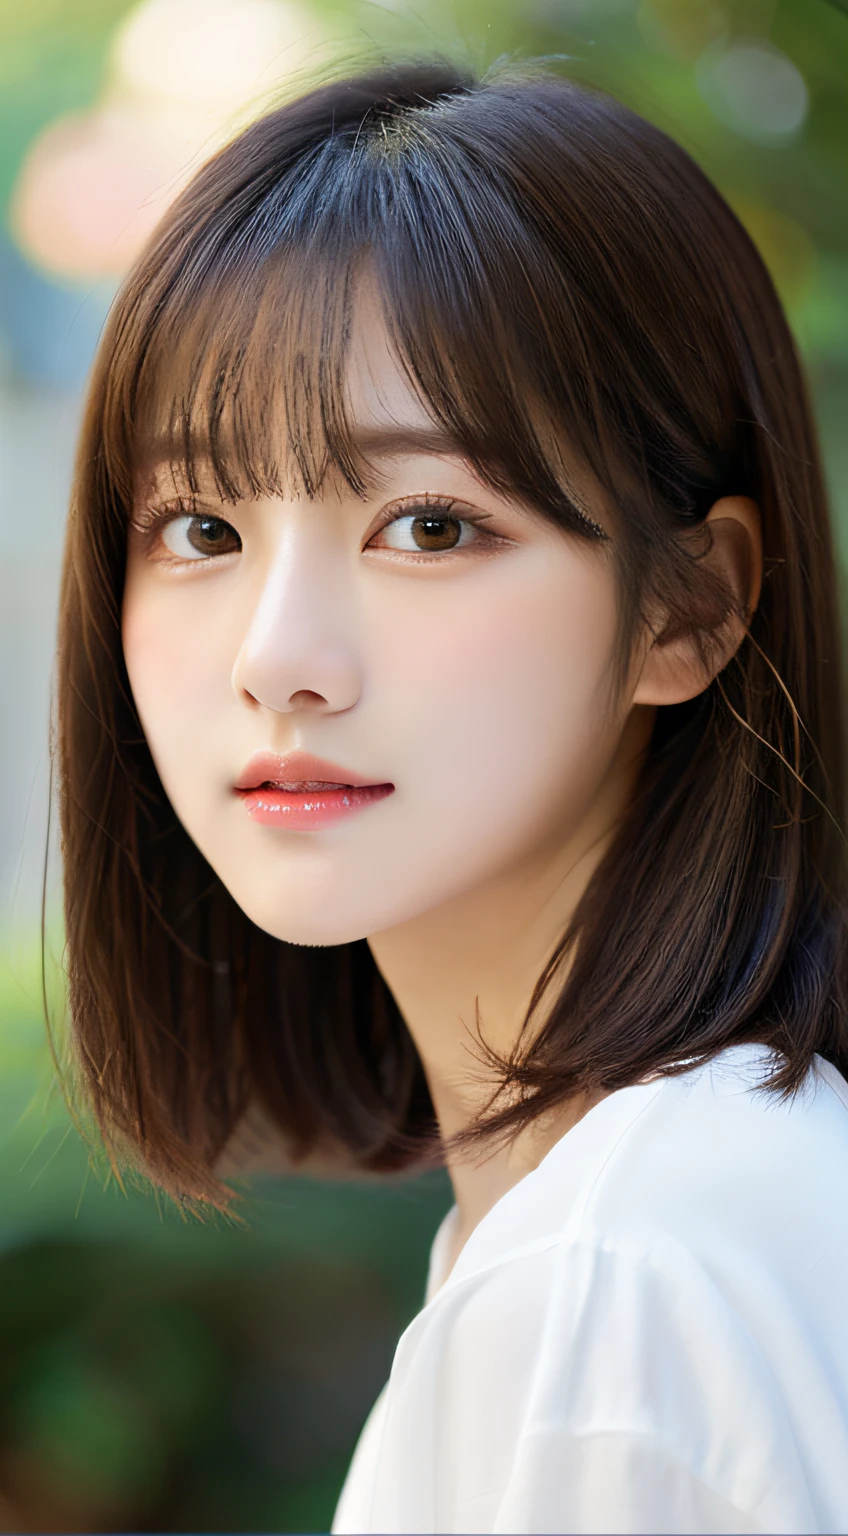 ((Beautiful and shiny、Neat straight bob hair))、En plein air, solo,top-quality、hyper HD、By bangs　(Beautiful fece:1.3) ((kawaii:1.3))、((Sixteen years old)) White shirt　Decolletage　Natural color lips　(Lori)  Sense of cleanliness　Pure　half-open lips　((kawaii)) ((frontage))